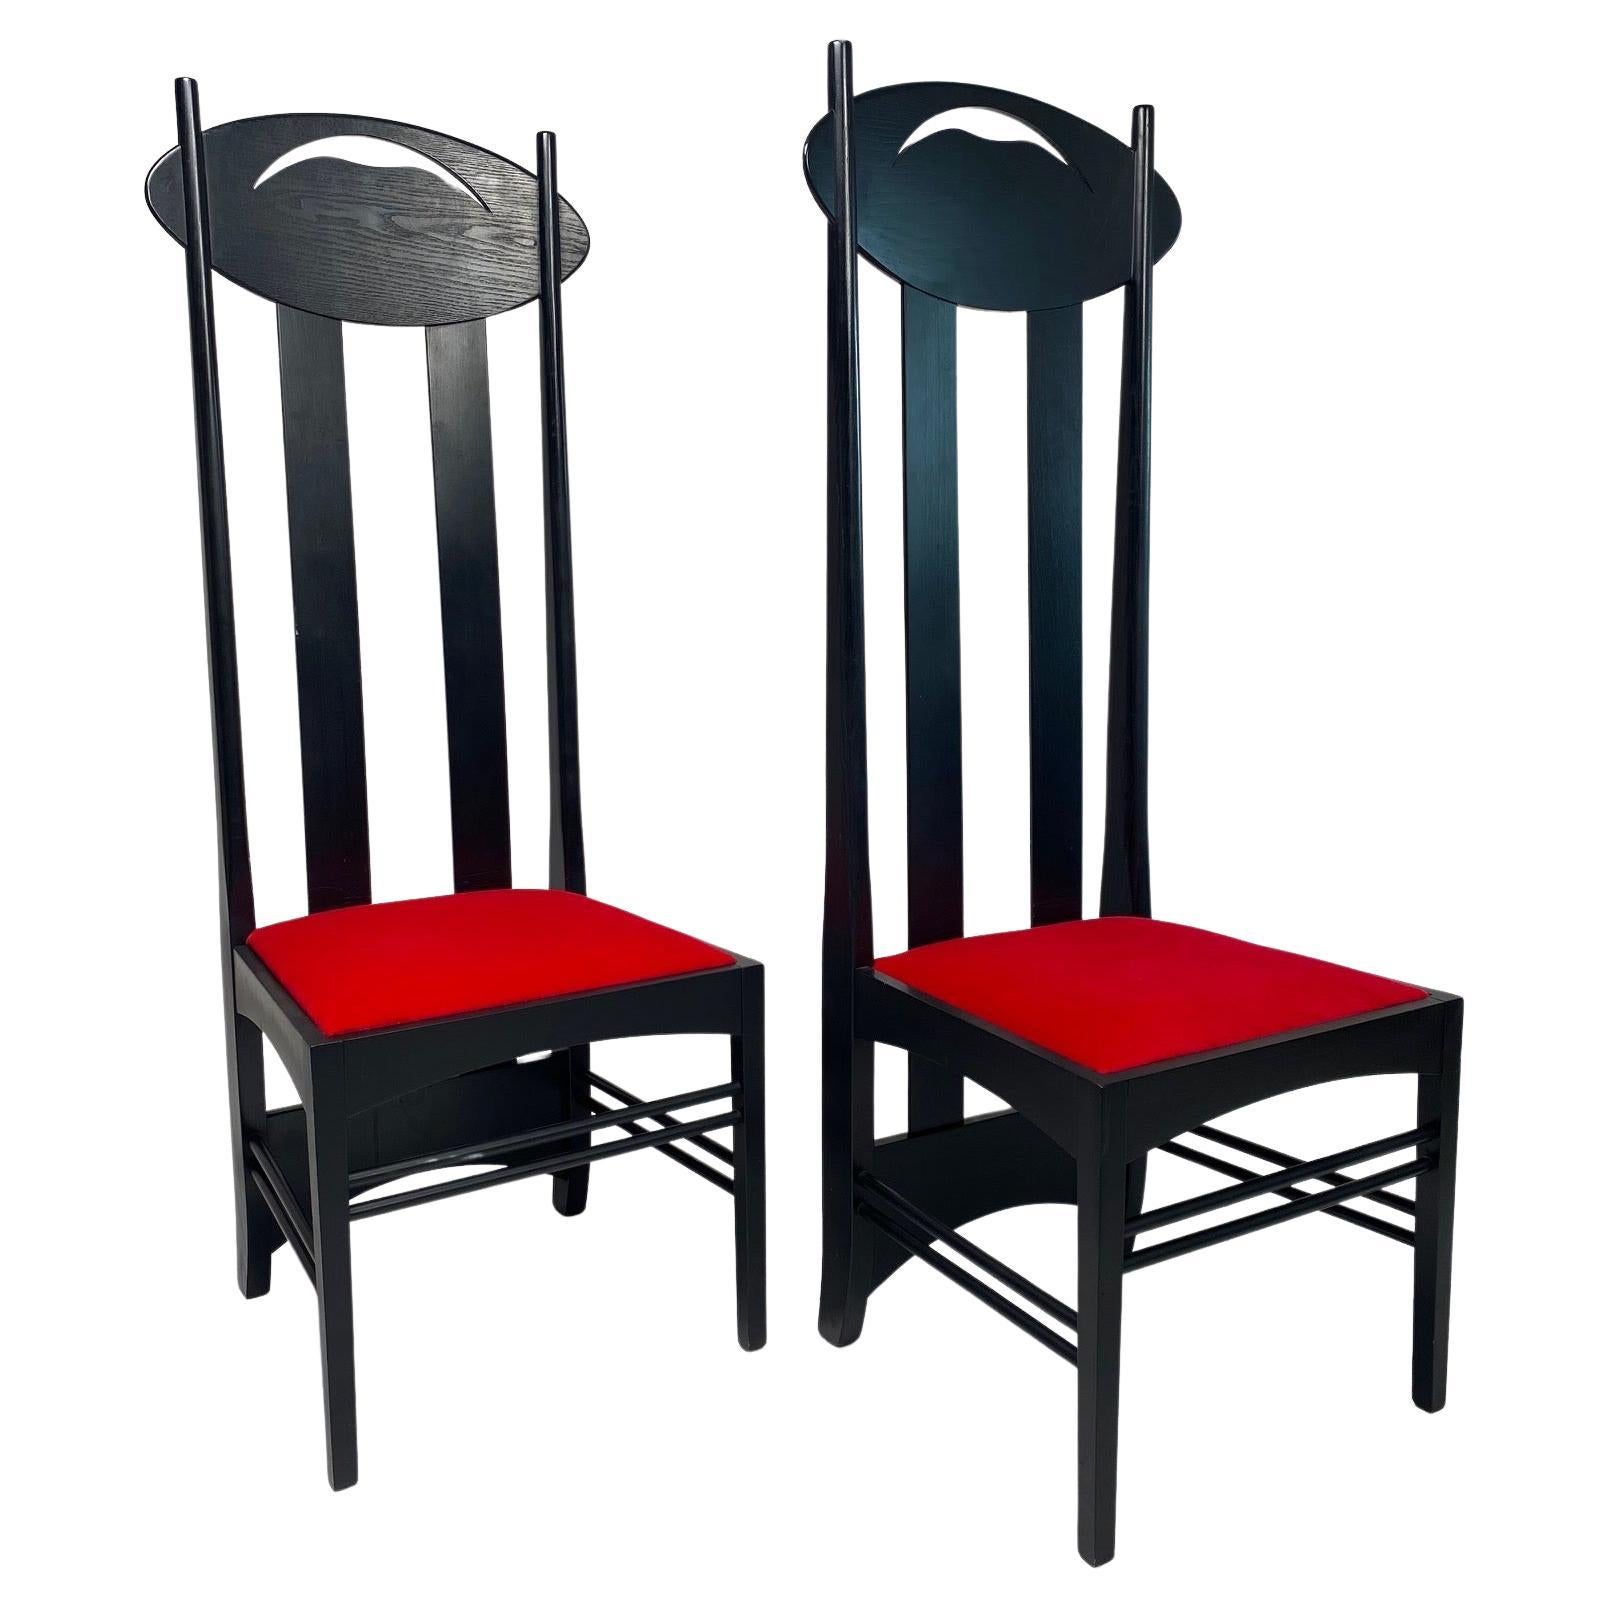 Pair of Argyle chairs by Charles Rennie Mackintosh for Atelier International, Designed 1897 and exhibited at the Eighth Secession Exhibition in Vienna, Austria in 1900,

It is one of the most iconic chairs of the famous Scottish architect,